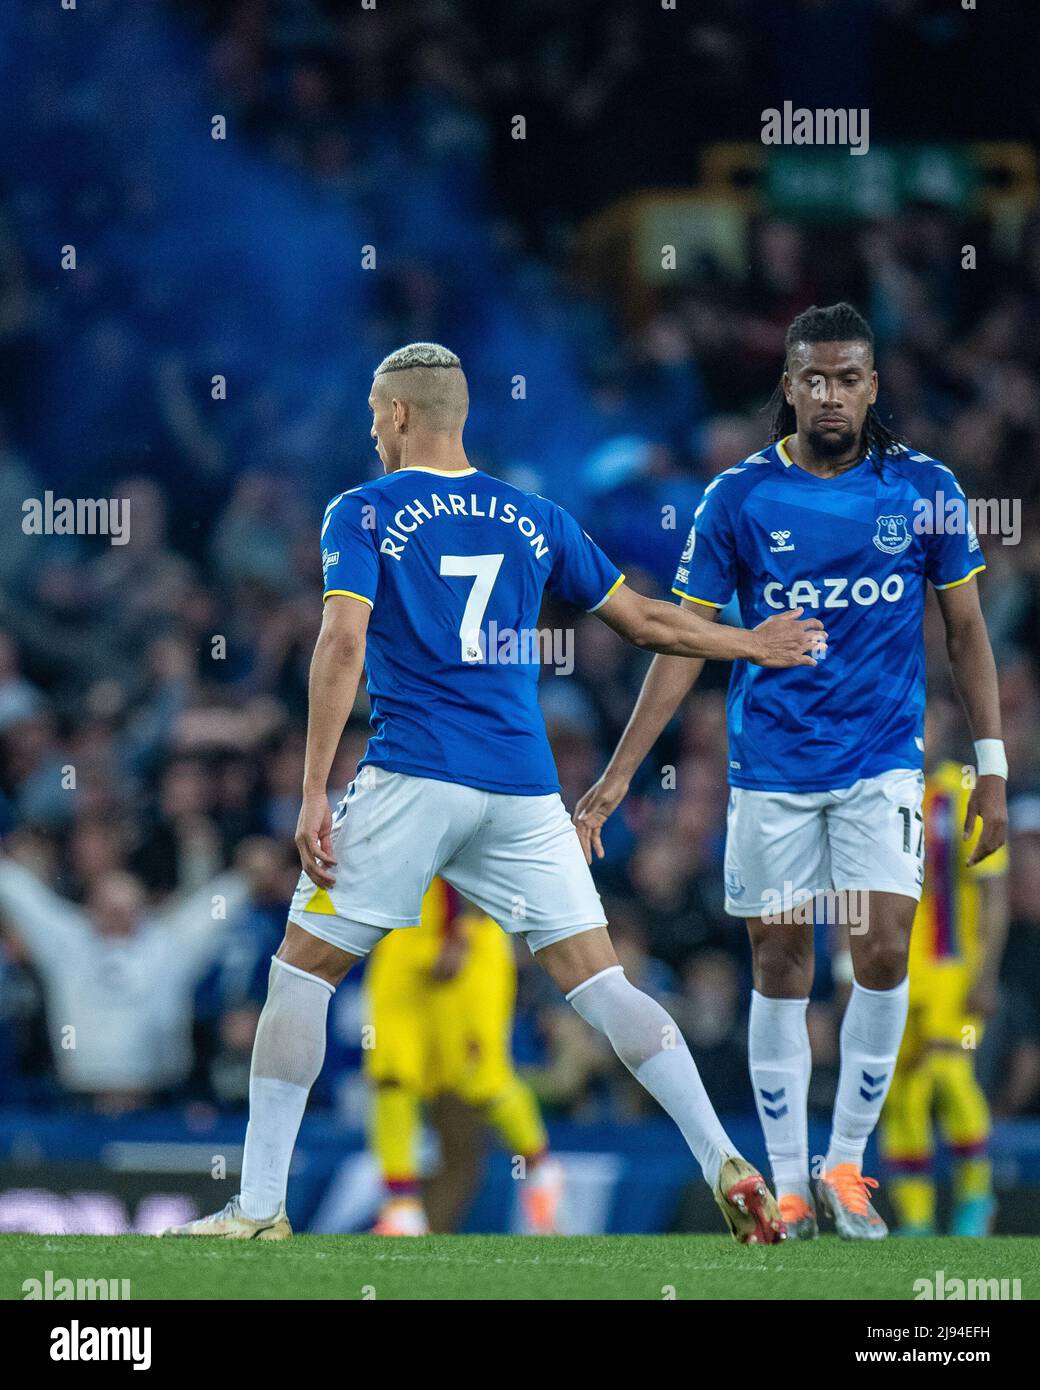 LIVERPOOL, ENGLAND - MAY 19: Richarlison of Everton celebrates after scoring goal during the Premier League match between Everton and Crystal Palace at Goodison Park on May 19, 2022 in Liverpool, United Kingdom. (Photo by Sebastian Frej) Stock Photo